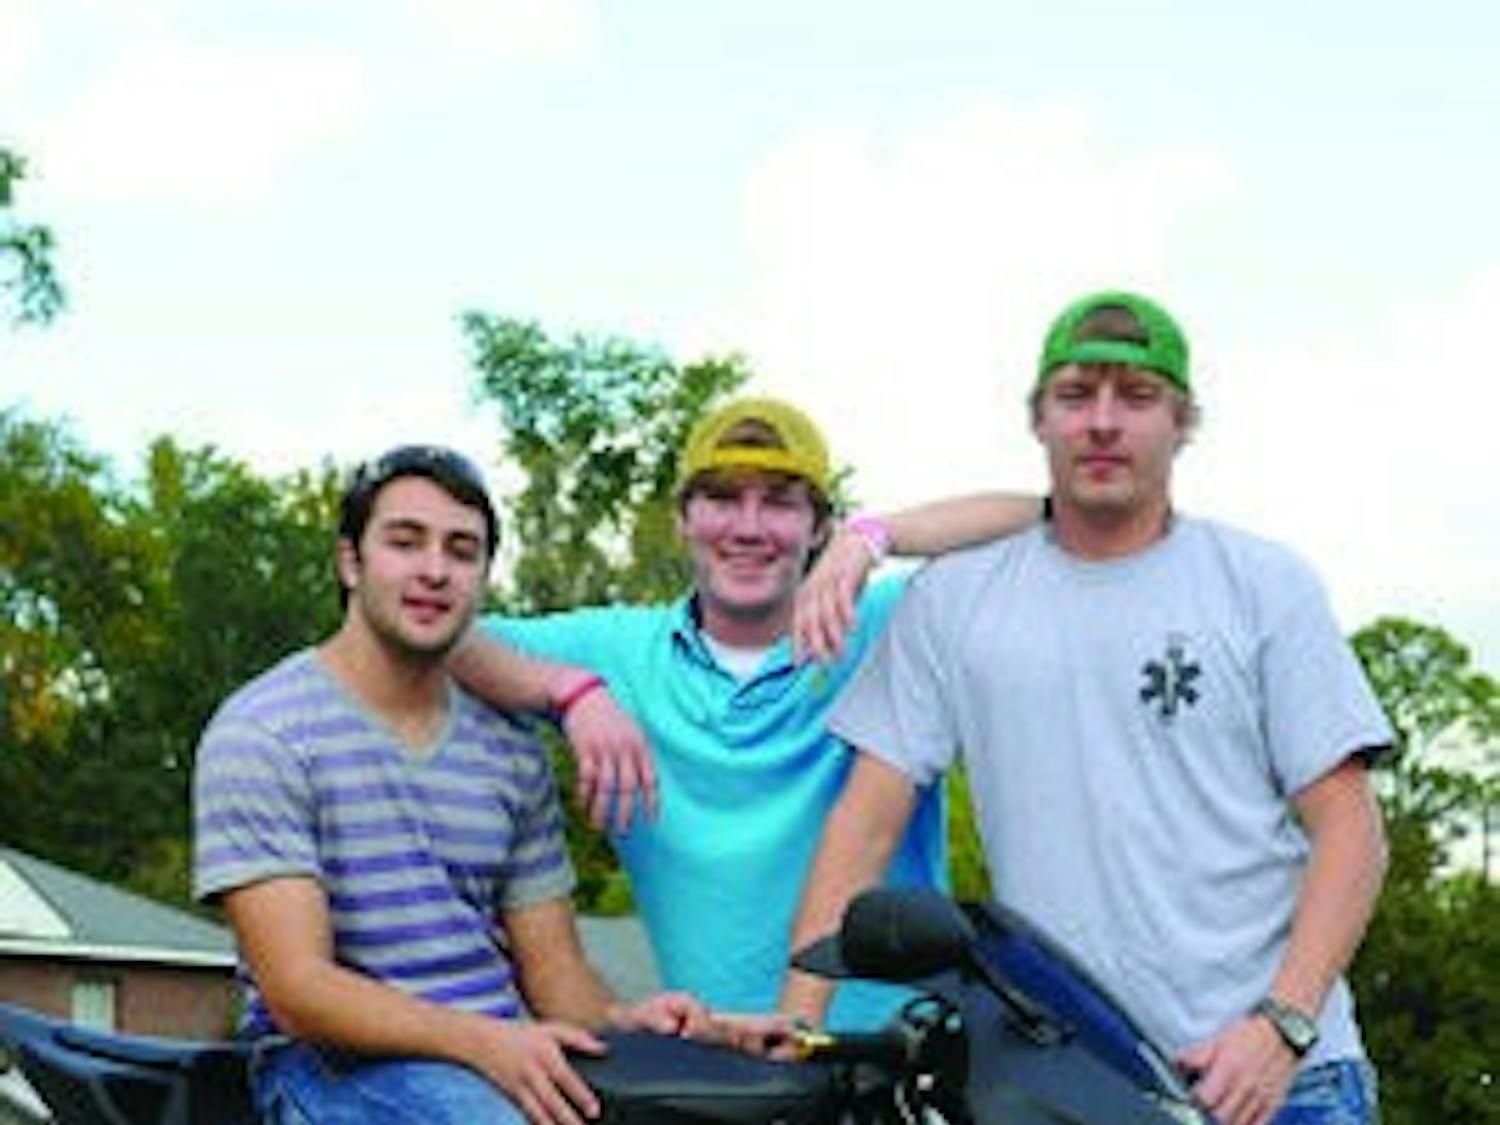 Zaid Kayyali, sophomore in international business, Brandon Batchelor and Seth Clayton plan to travel 12,000 miles across the U.S. to raise funds for the American Cancer Society. (Christen Harned / ASSISTANT PHOTO EDITOR)